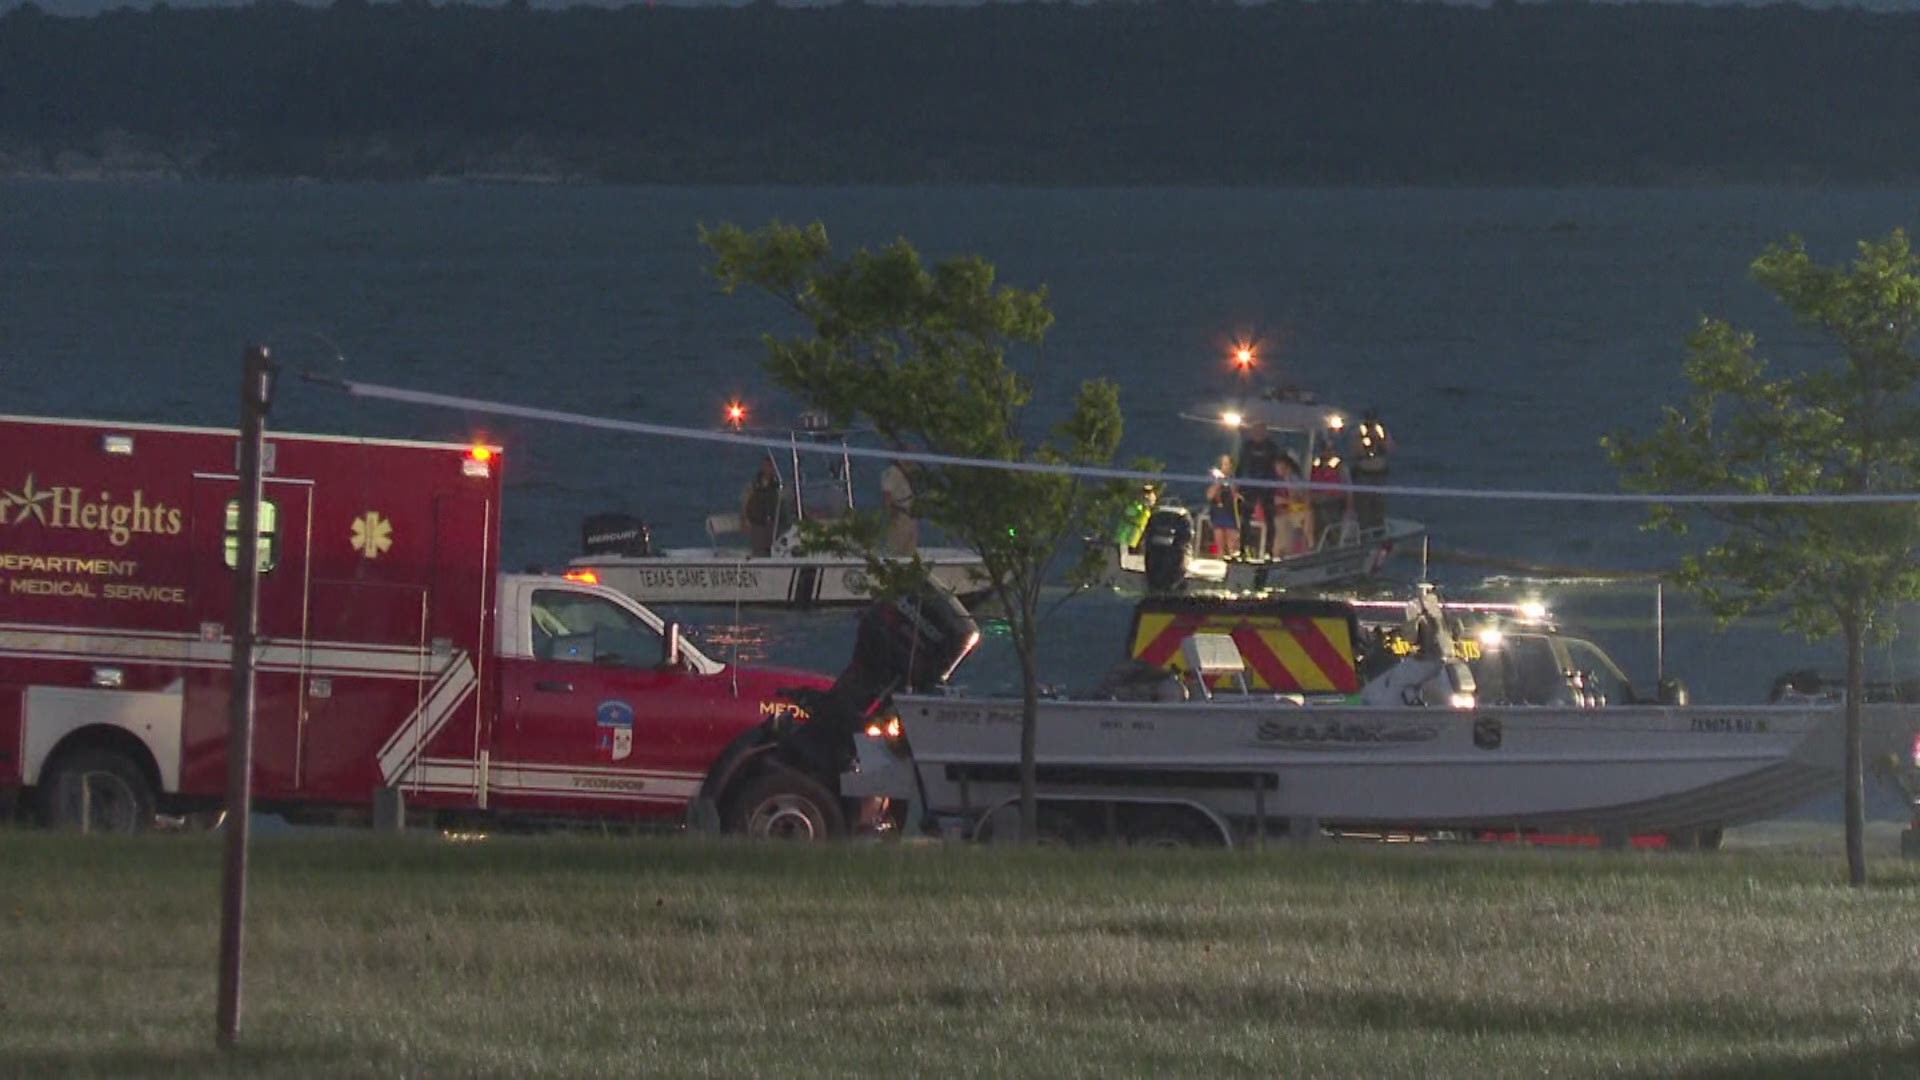 Search crews found the body of a 22-year-old Killeen man who drowned in Dana Peak Park.